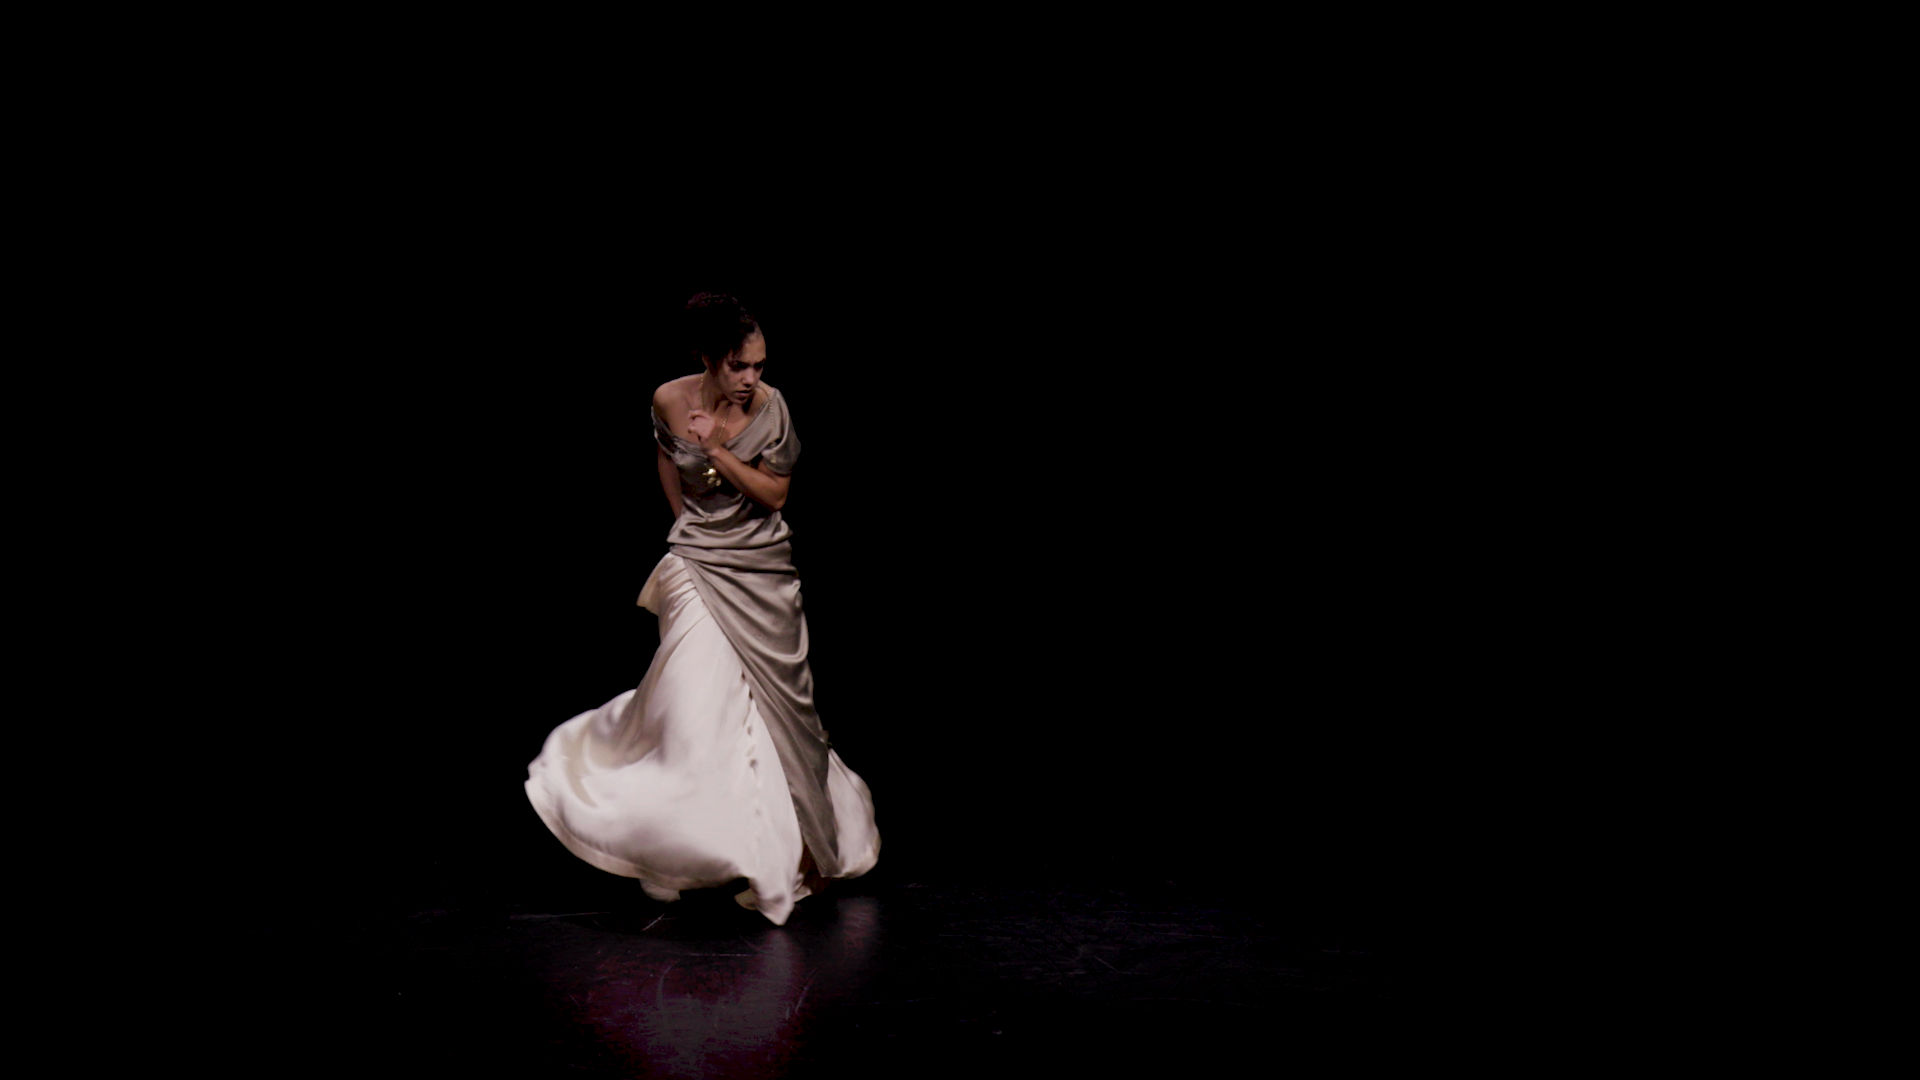 Maeva Berthelot dancing in a mink ball gown dress against a black background.